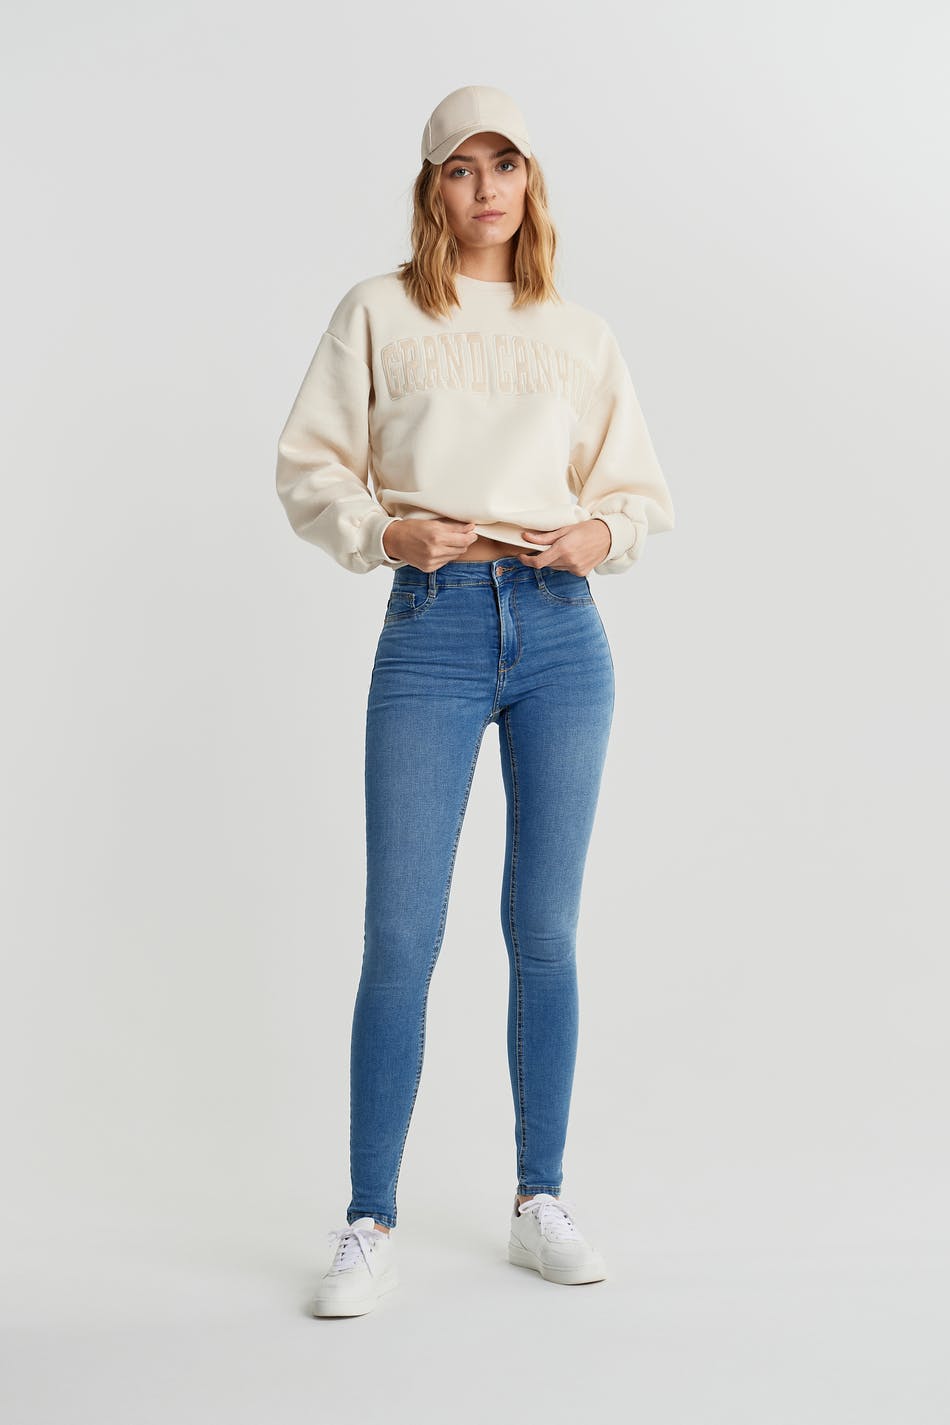 molly gina jeans - OFF-51% >Free